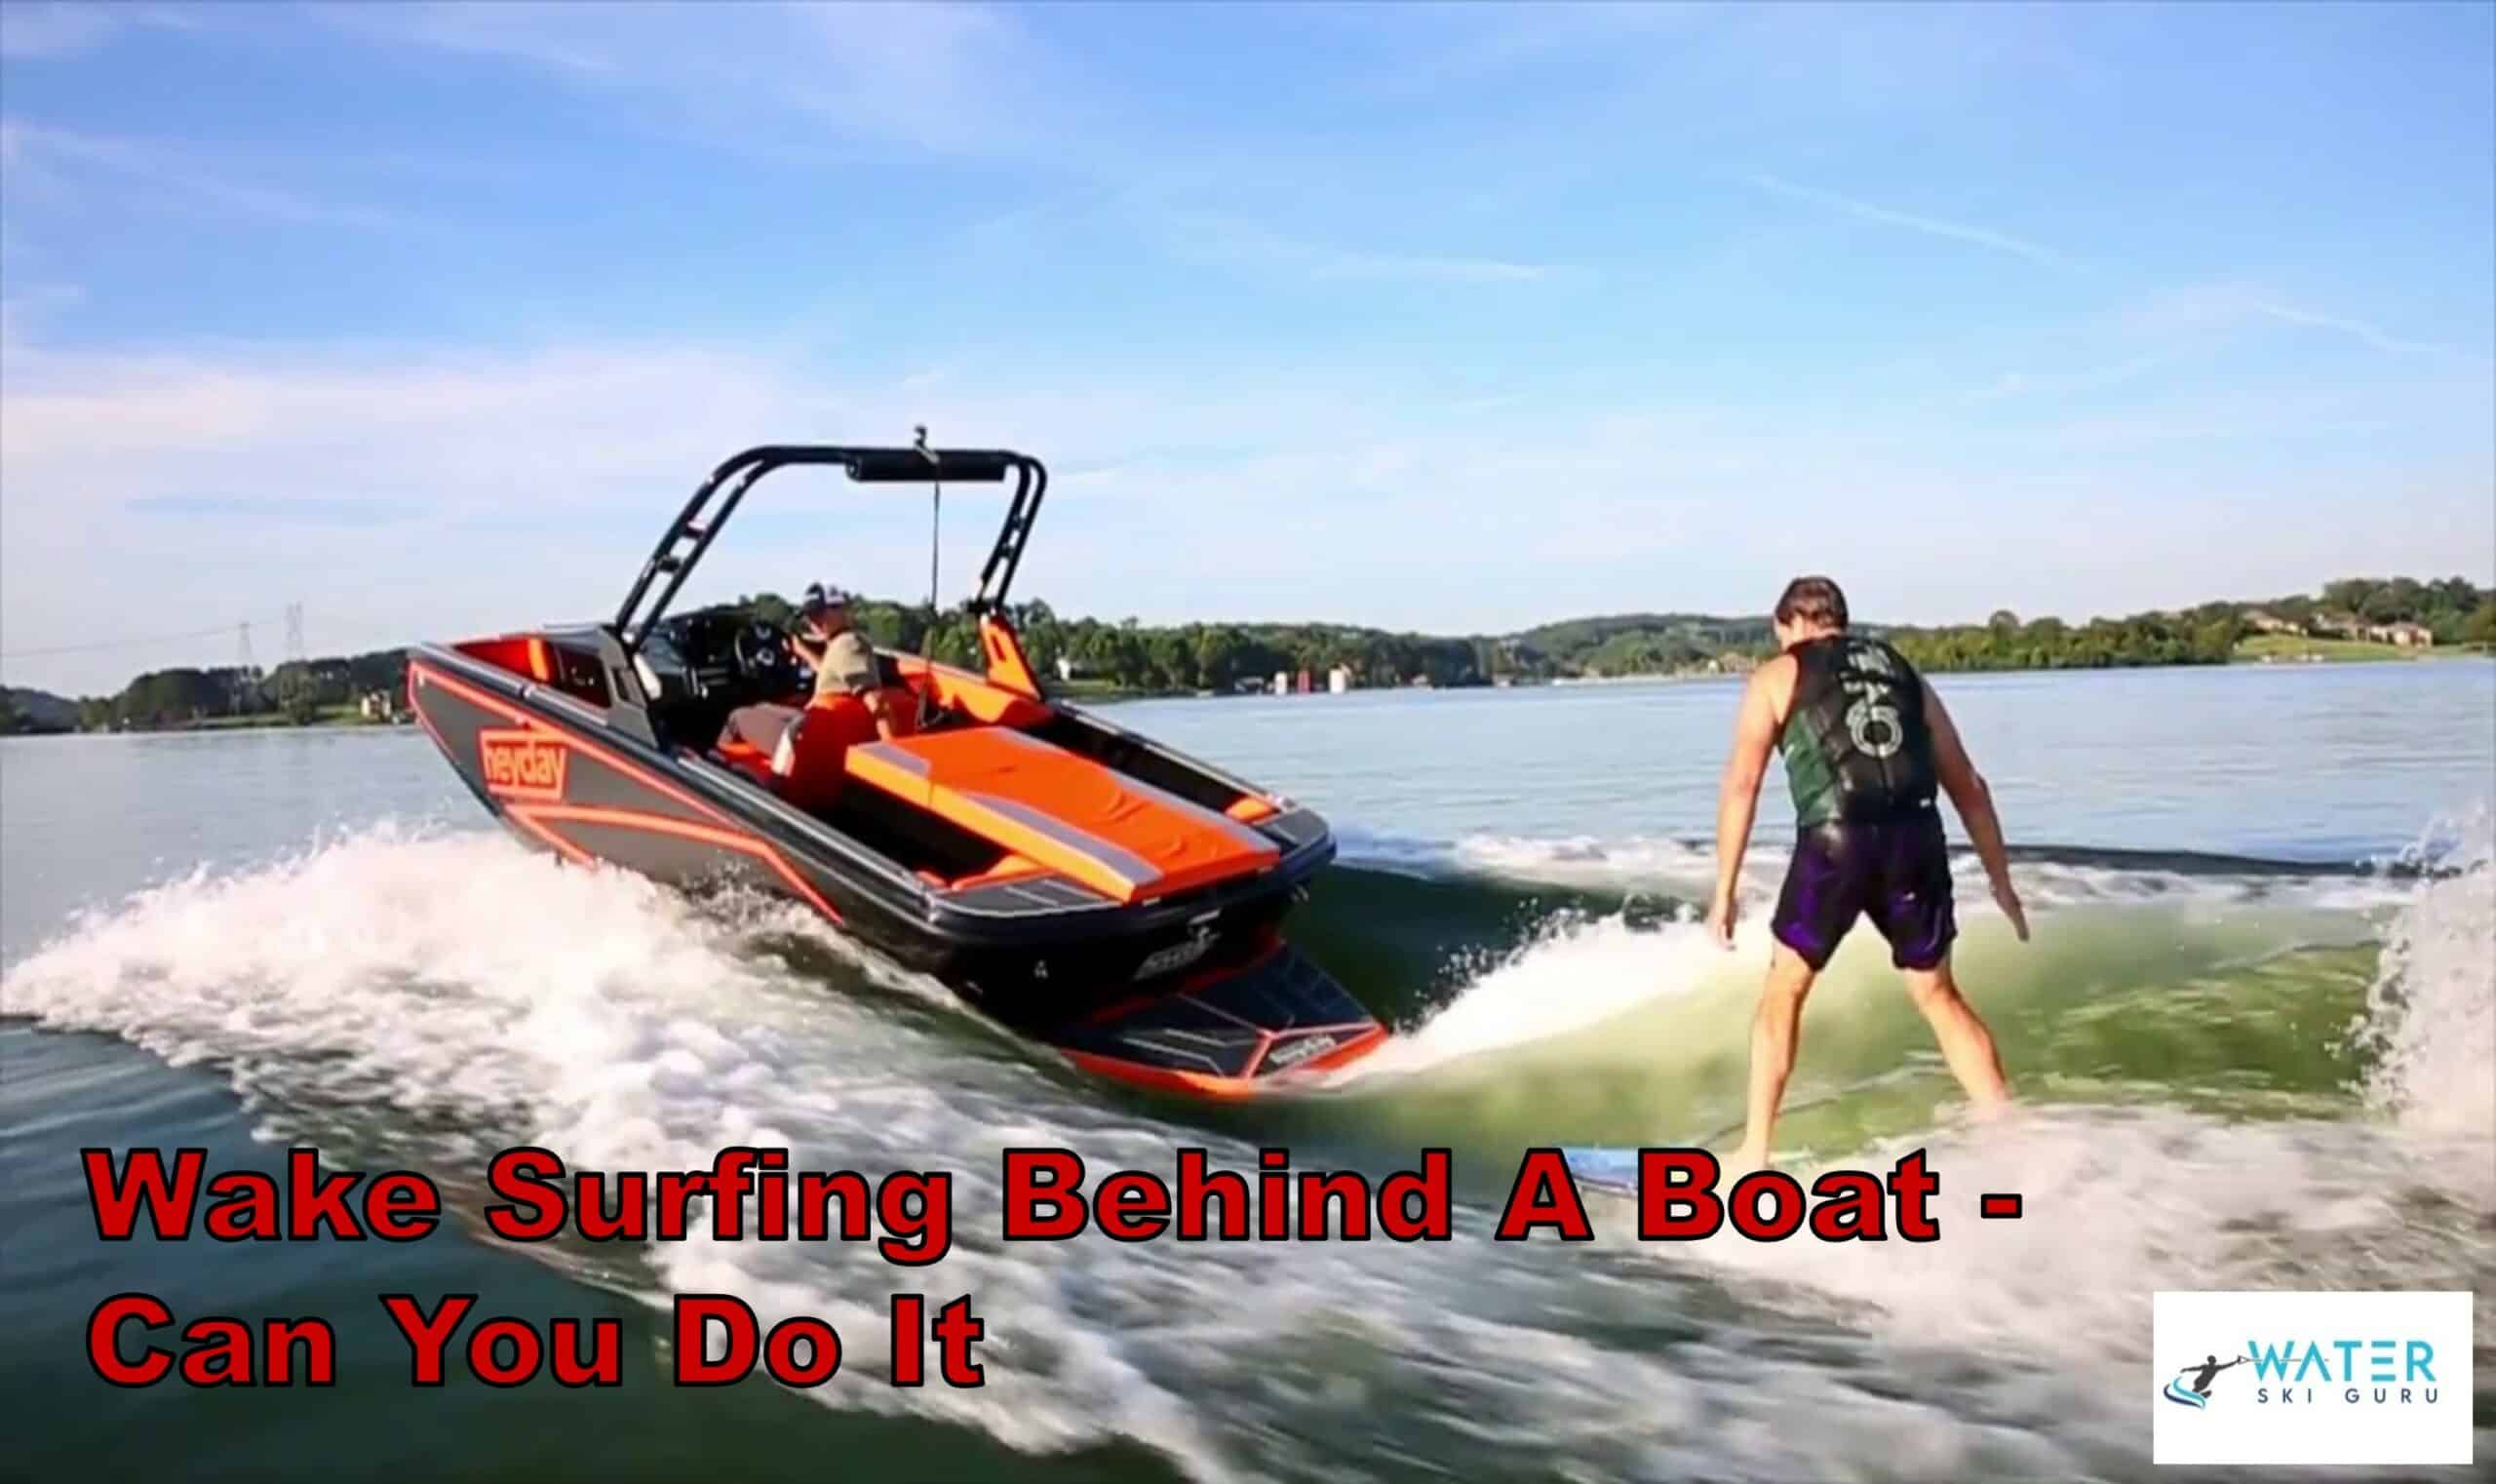 Wake Surfing Behind A Boat - Can You Do It